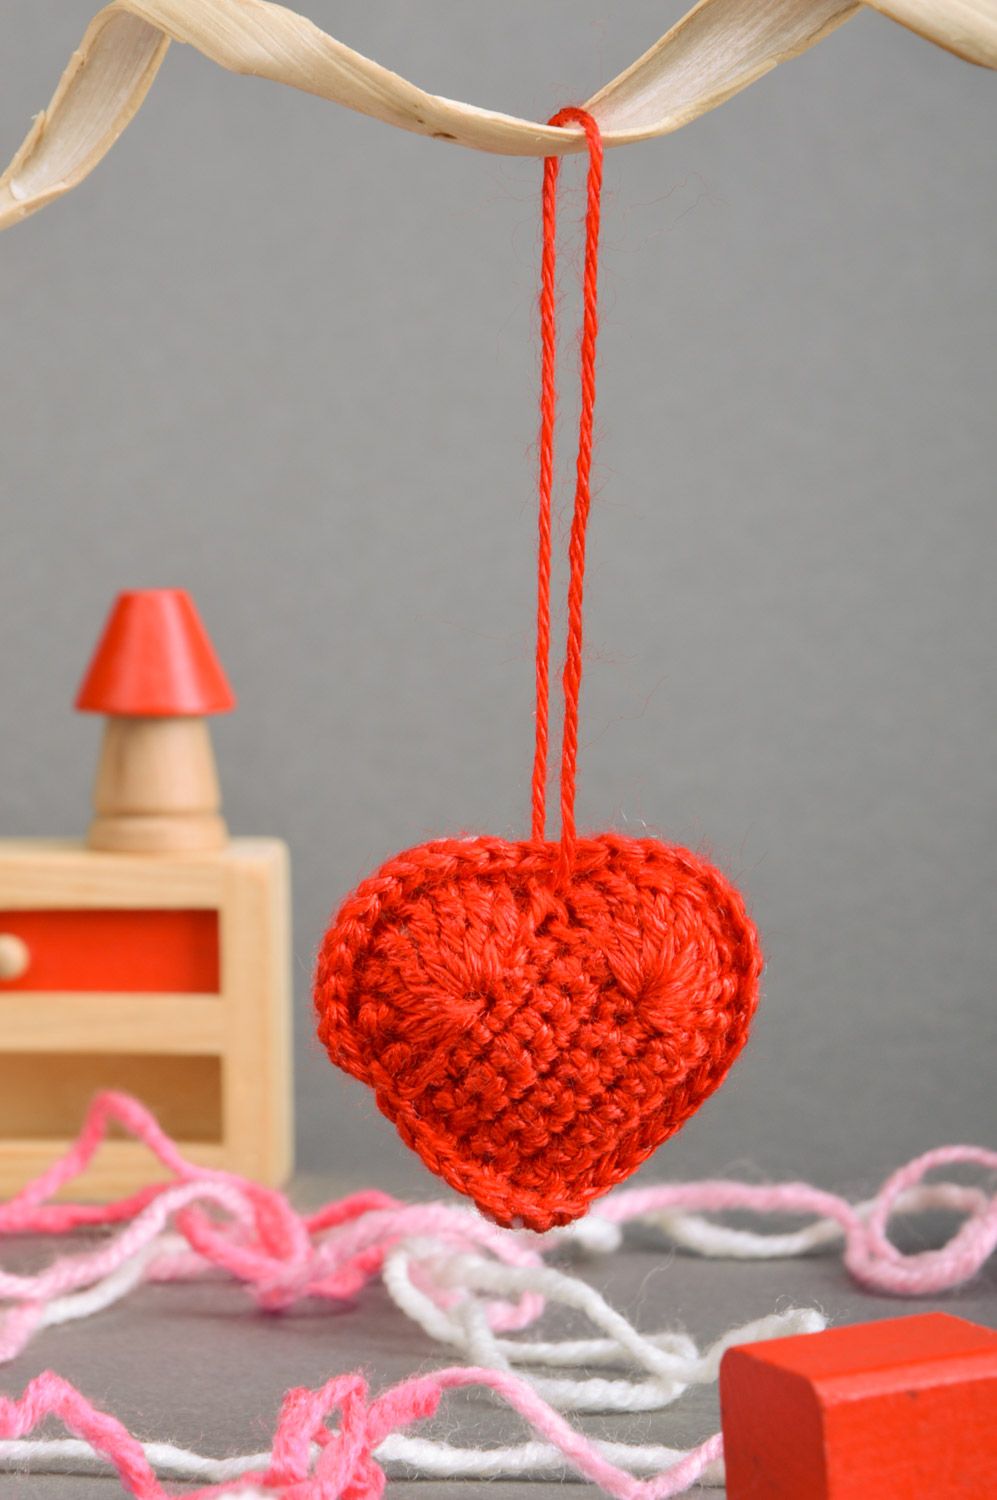 Handmade crochet interior wall hanging decoration Heart in red and white colors photo 1